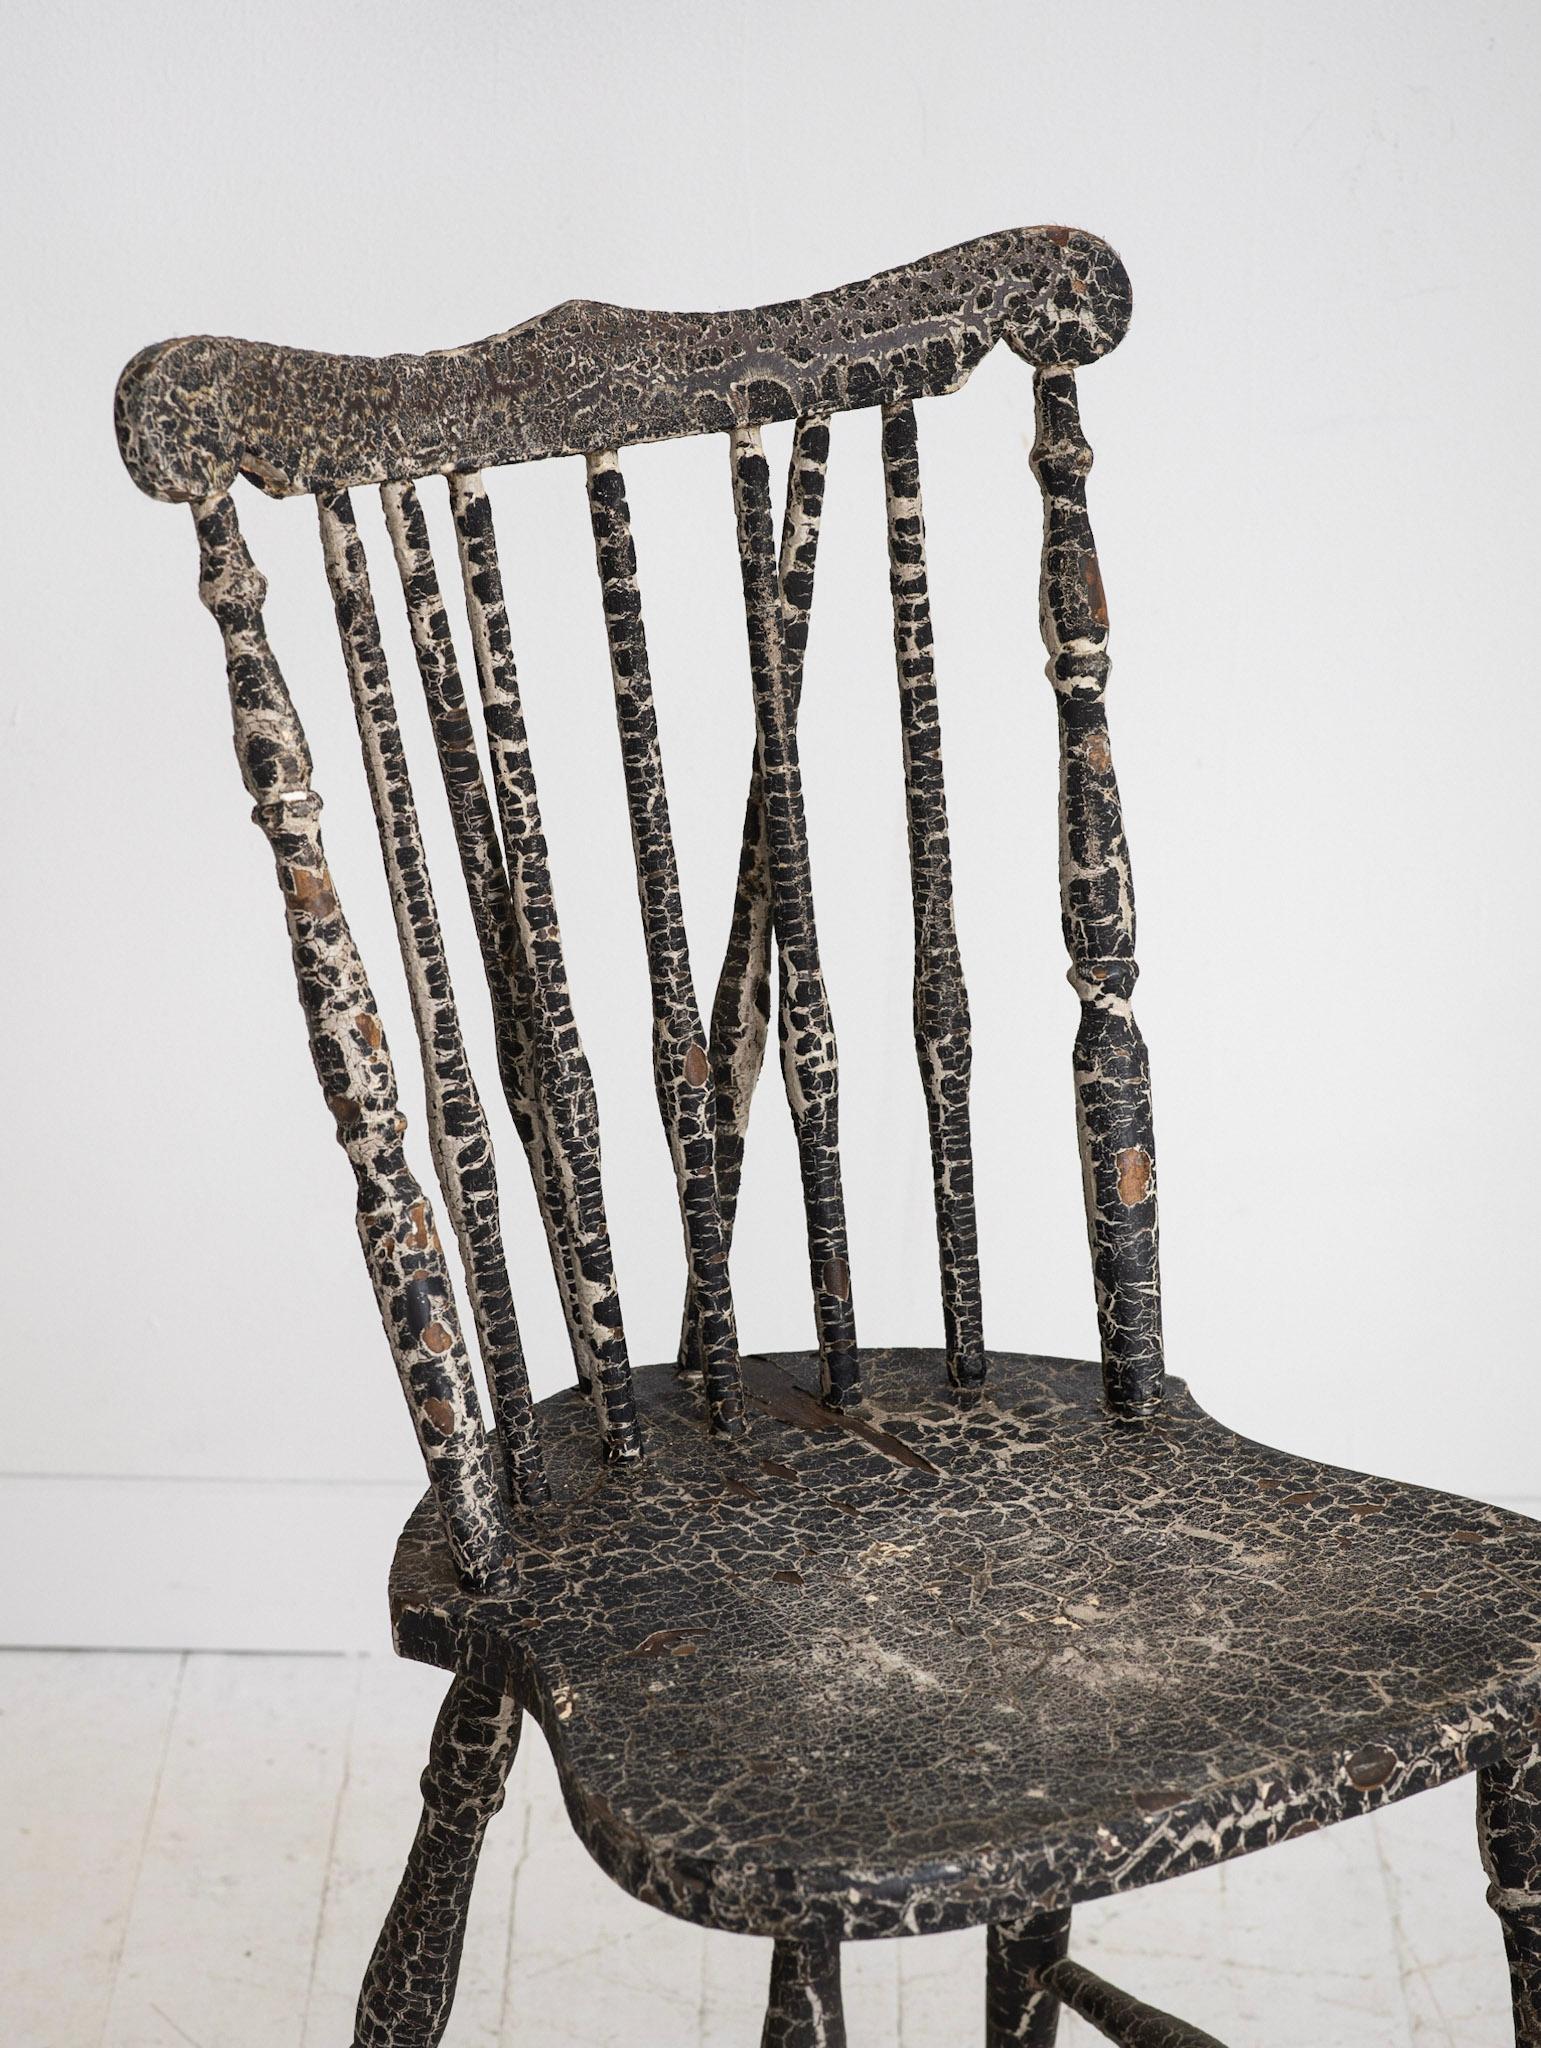 Antique wood chair with a wonderful natural patina. The paint has aged over time to create a thick textured crackle finish. Chair is usable but is best suited as a decor piece.